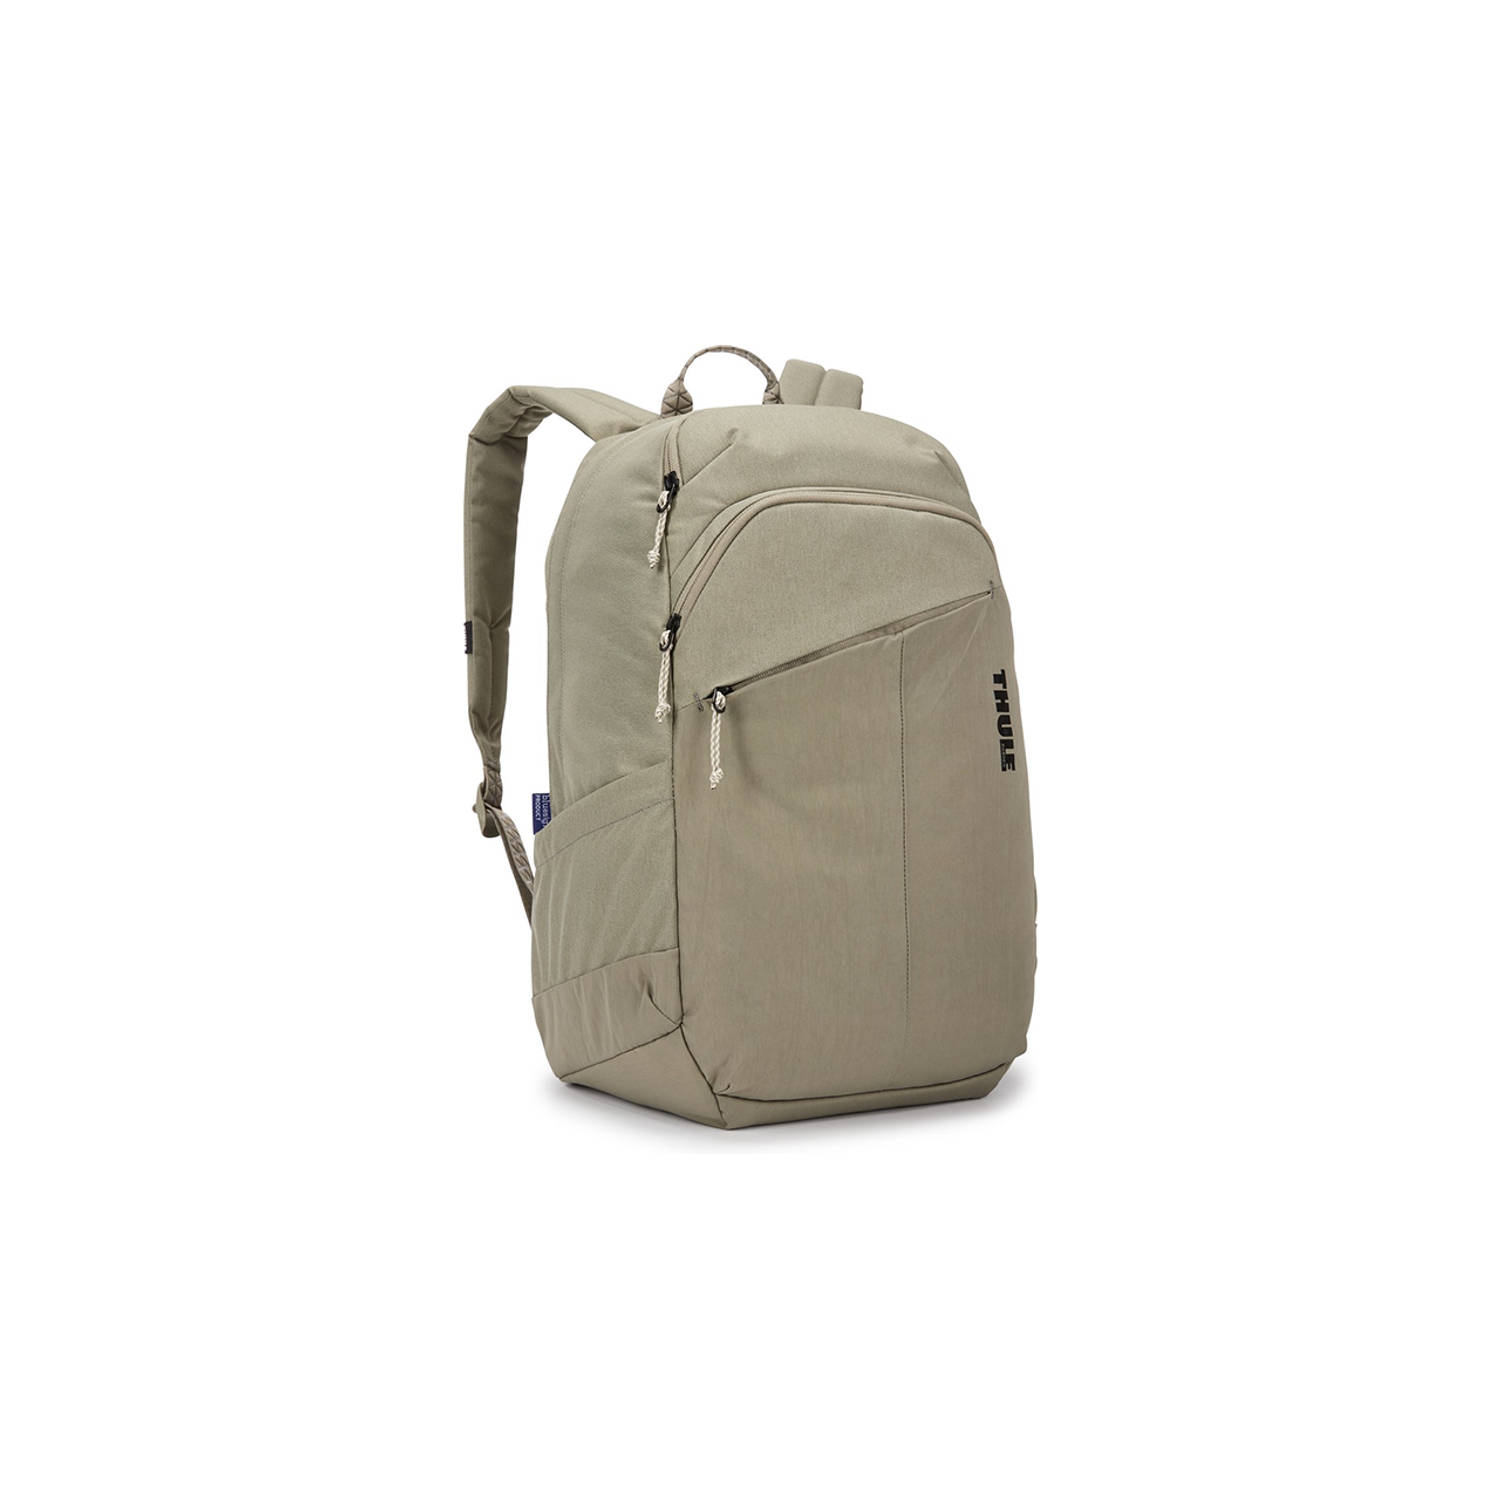 Thule Campus Exeo Backpack 28L vetiver gray backpack